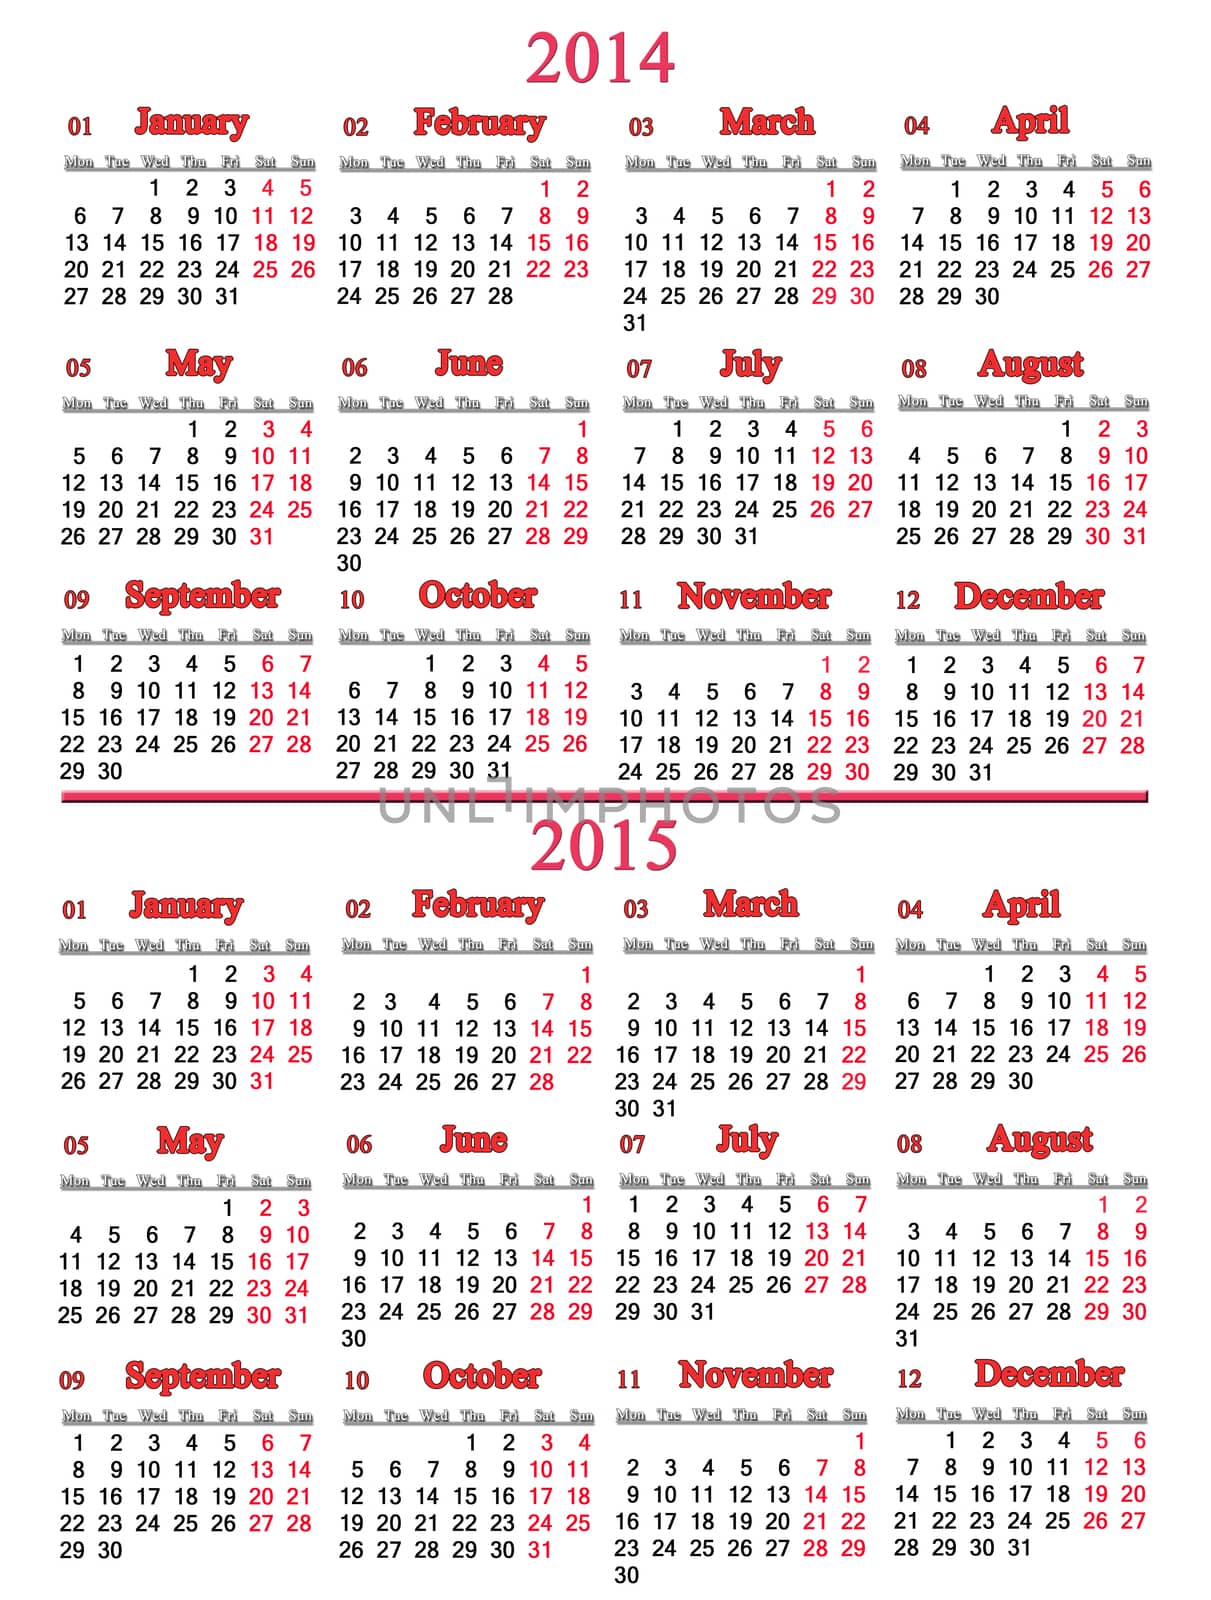 usual office calendar for 2014 - 2015 years on white background